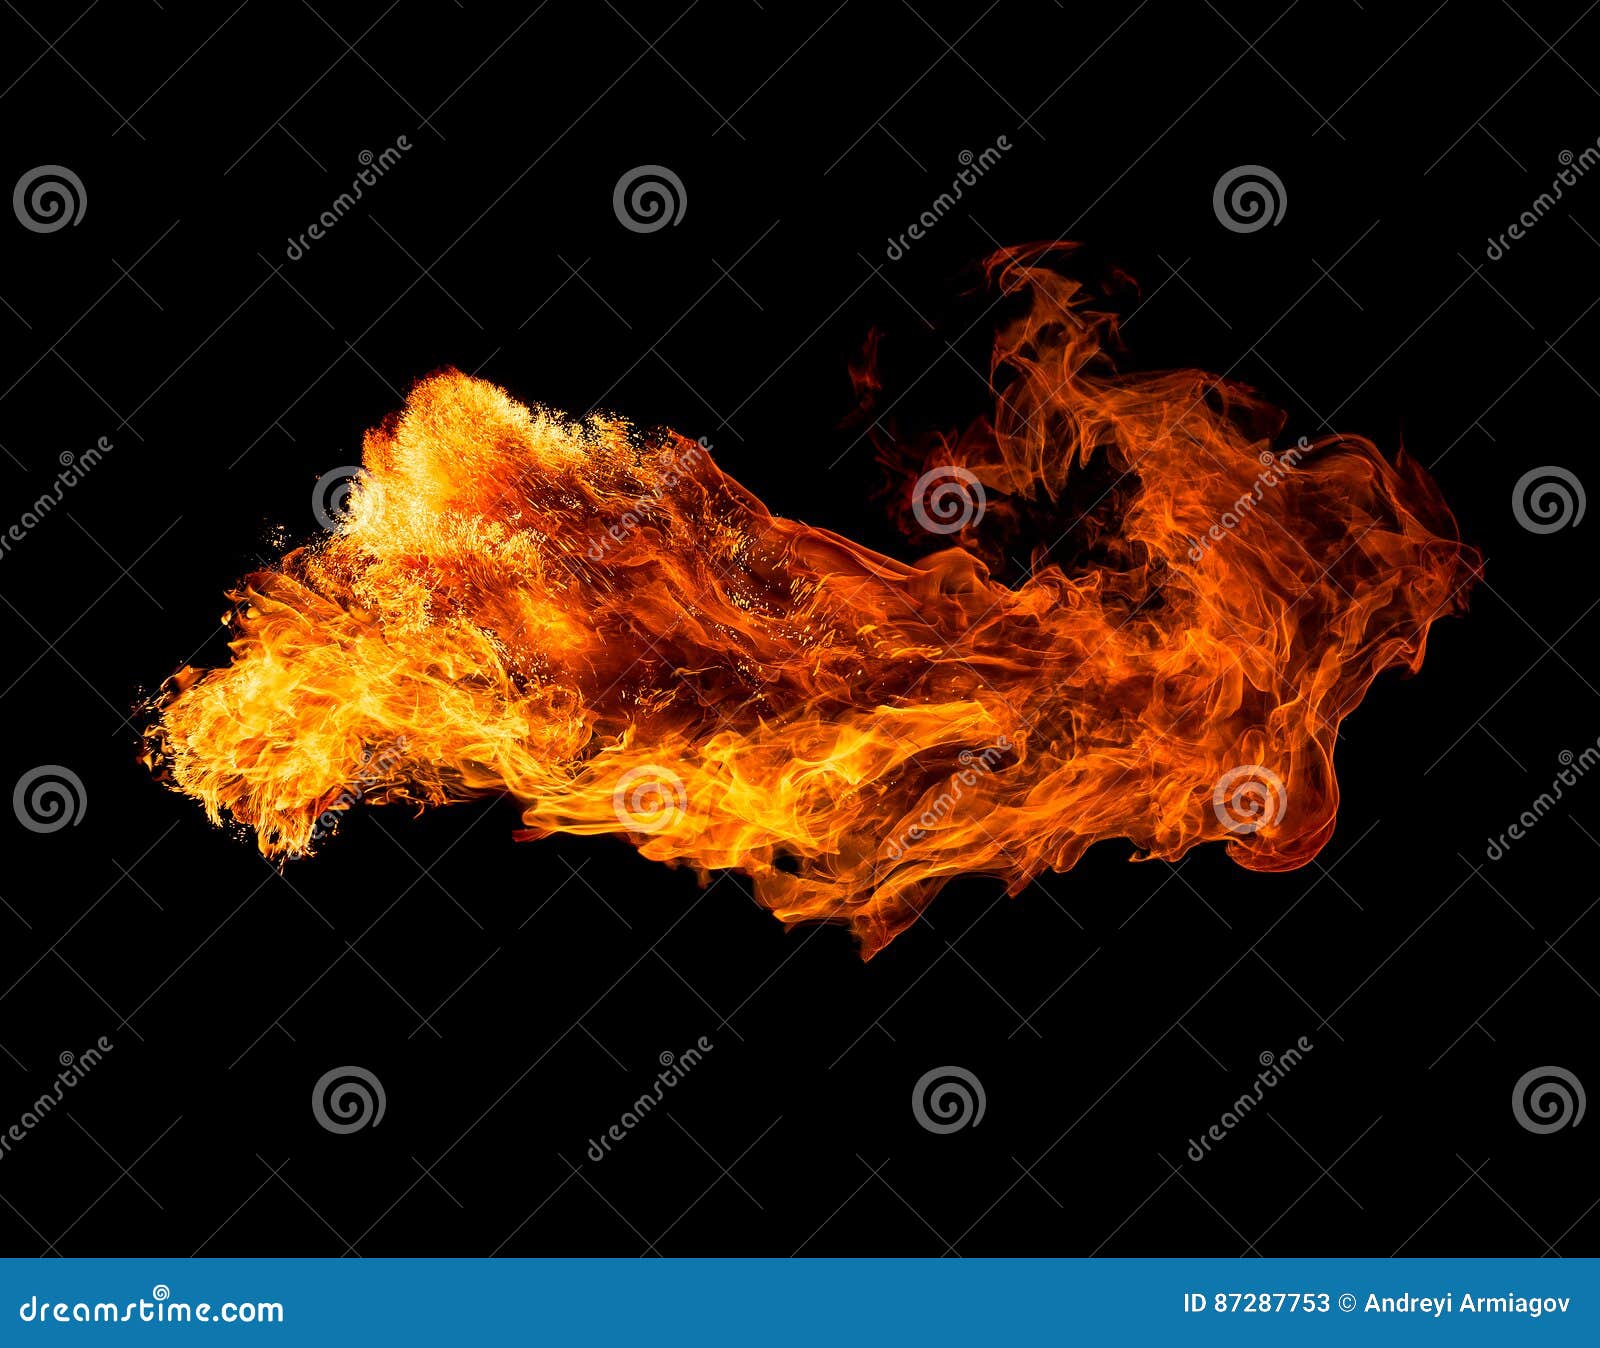 737,212 Background Danger Stock Photos - Free & Royalty-Free Stock Photos  from Dreamstime